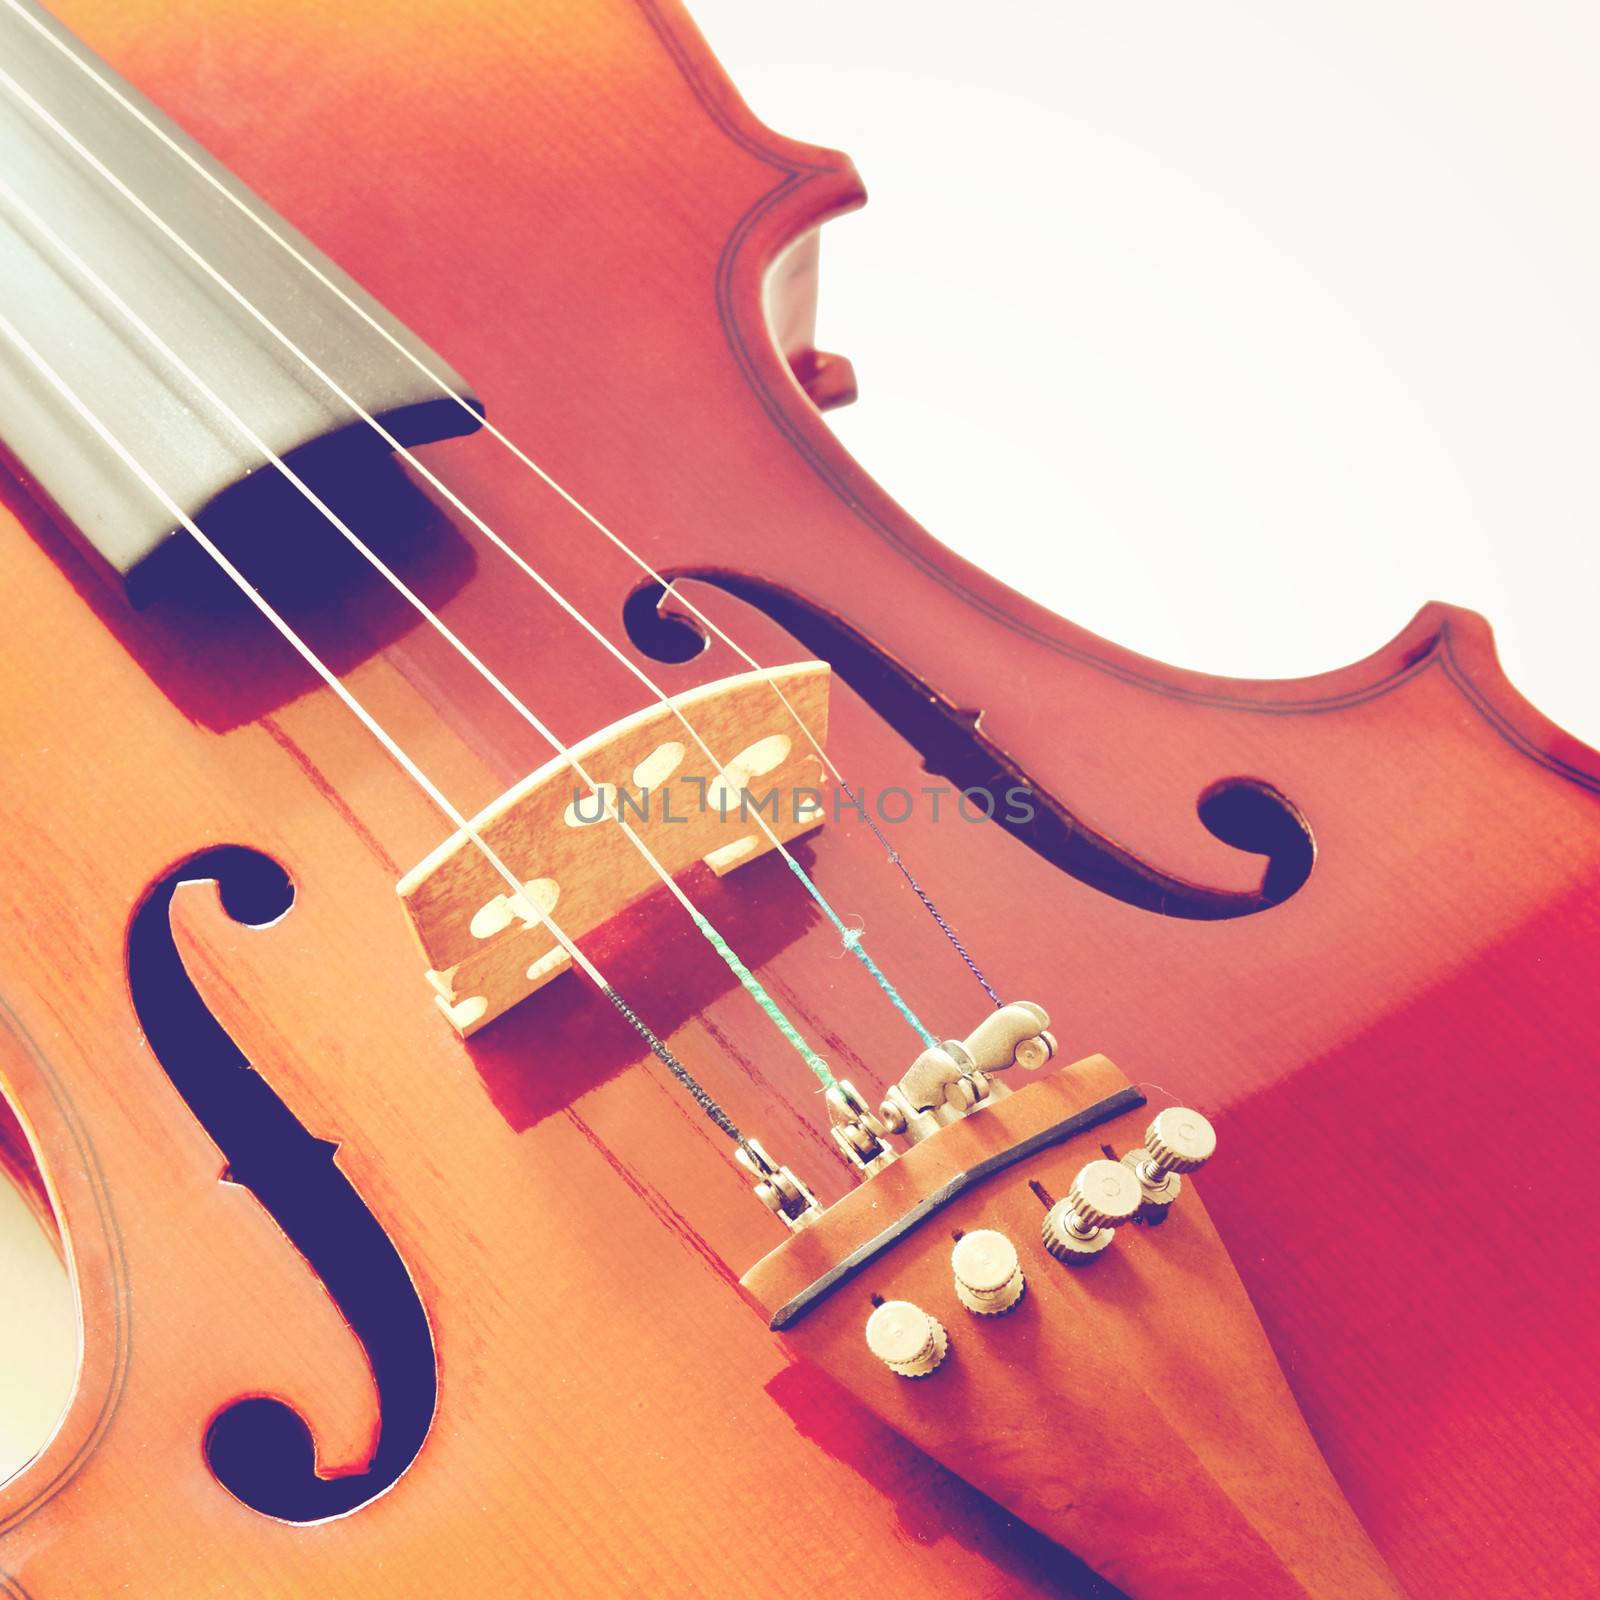 Part of violin with retro filter effect 